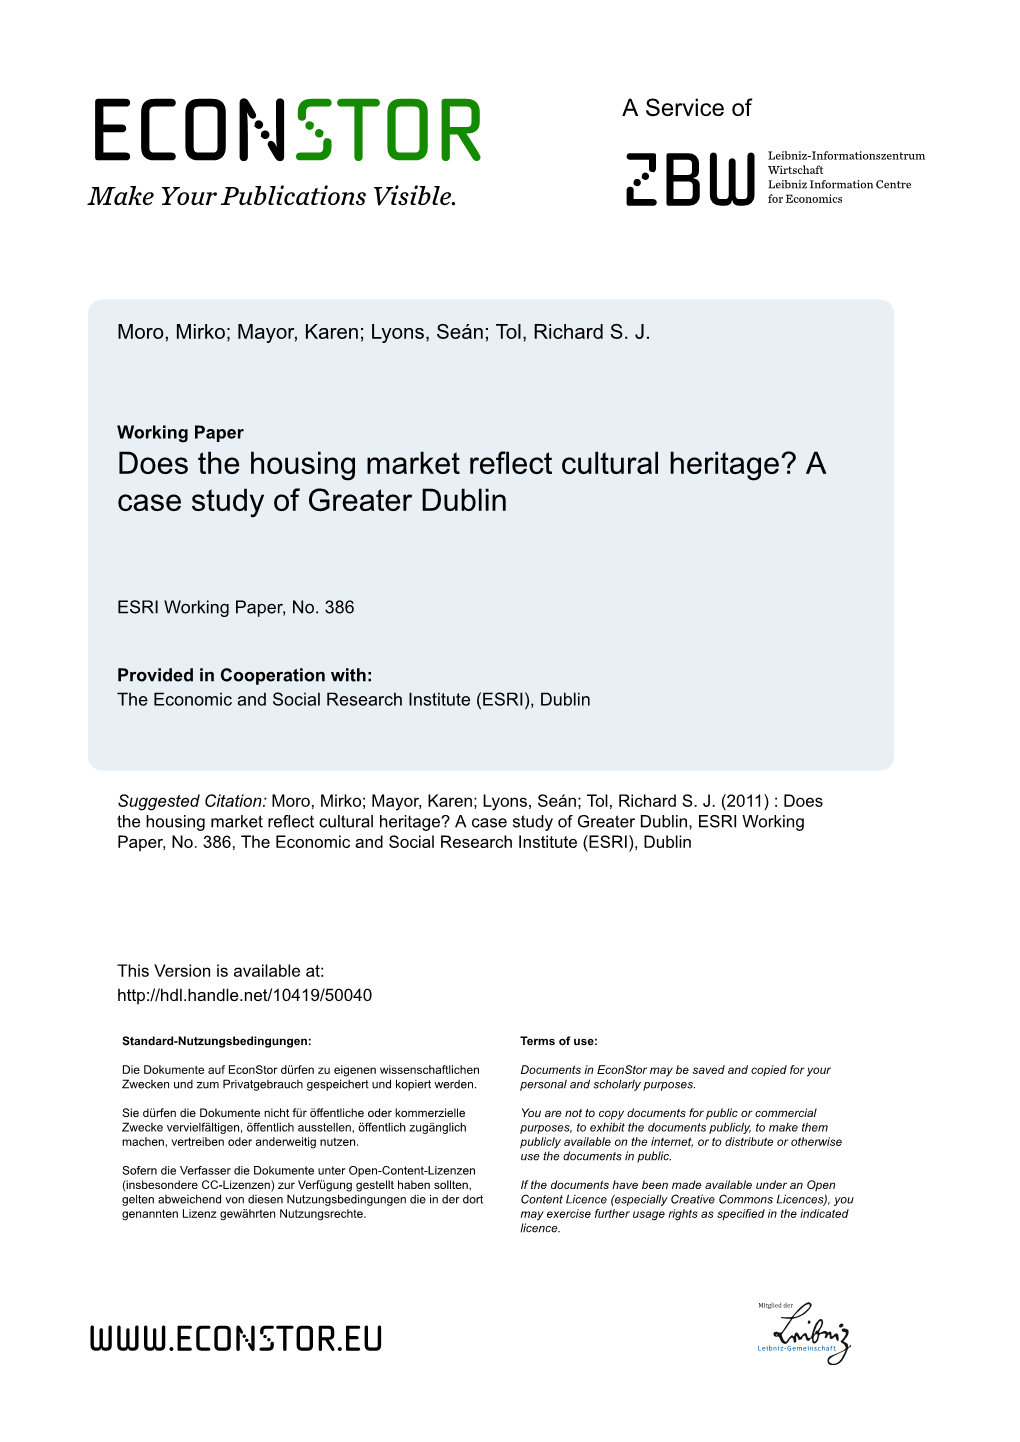 Does the Housing Market Reflect Cultural Heritage? a Case Study of Greater Dublin